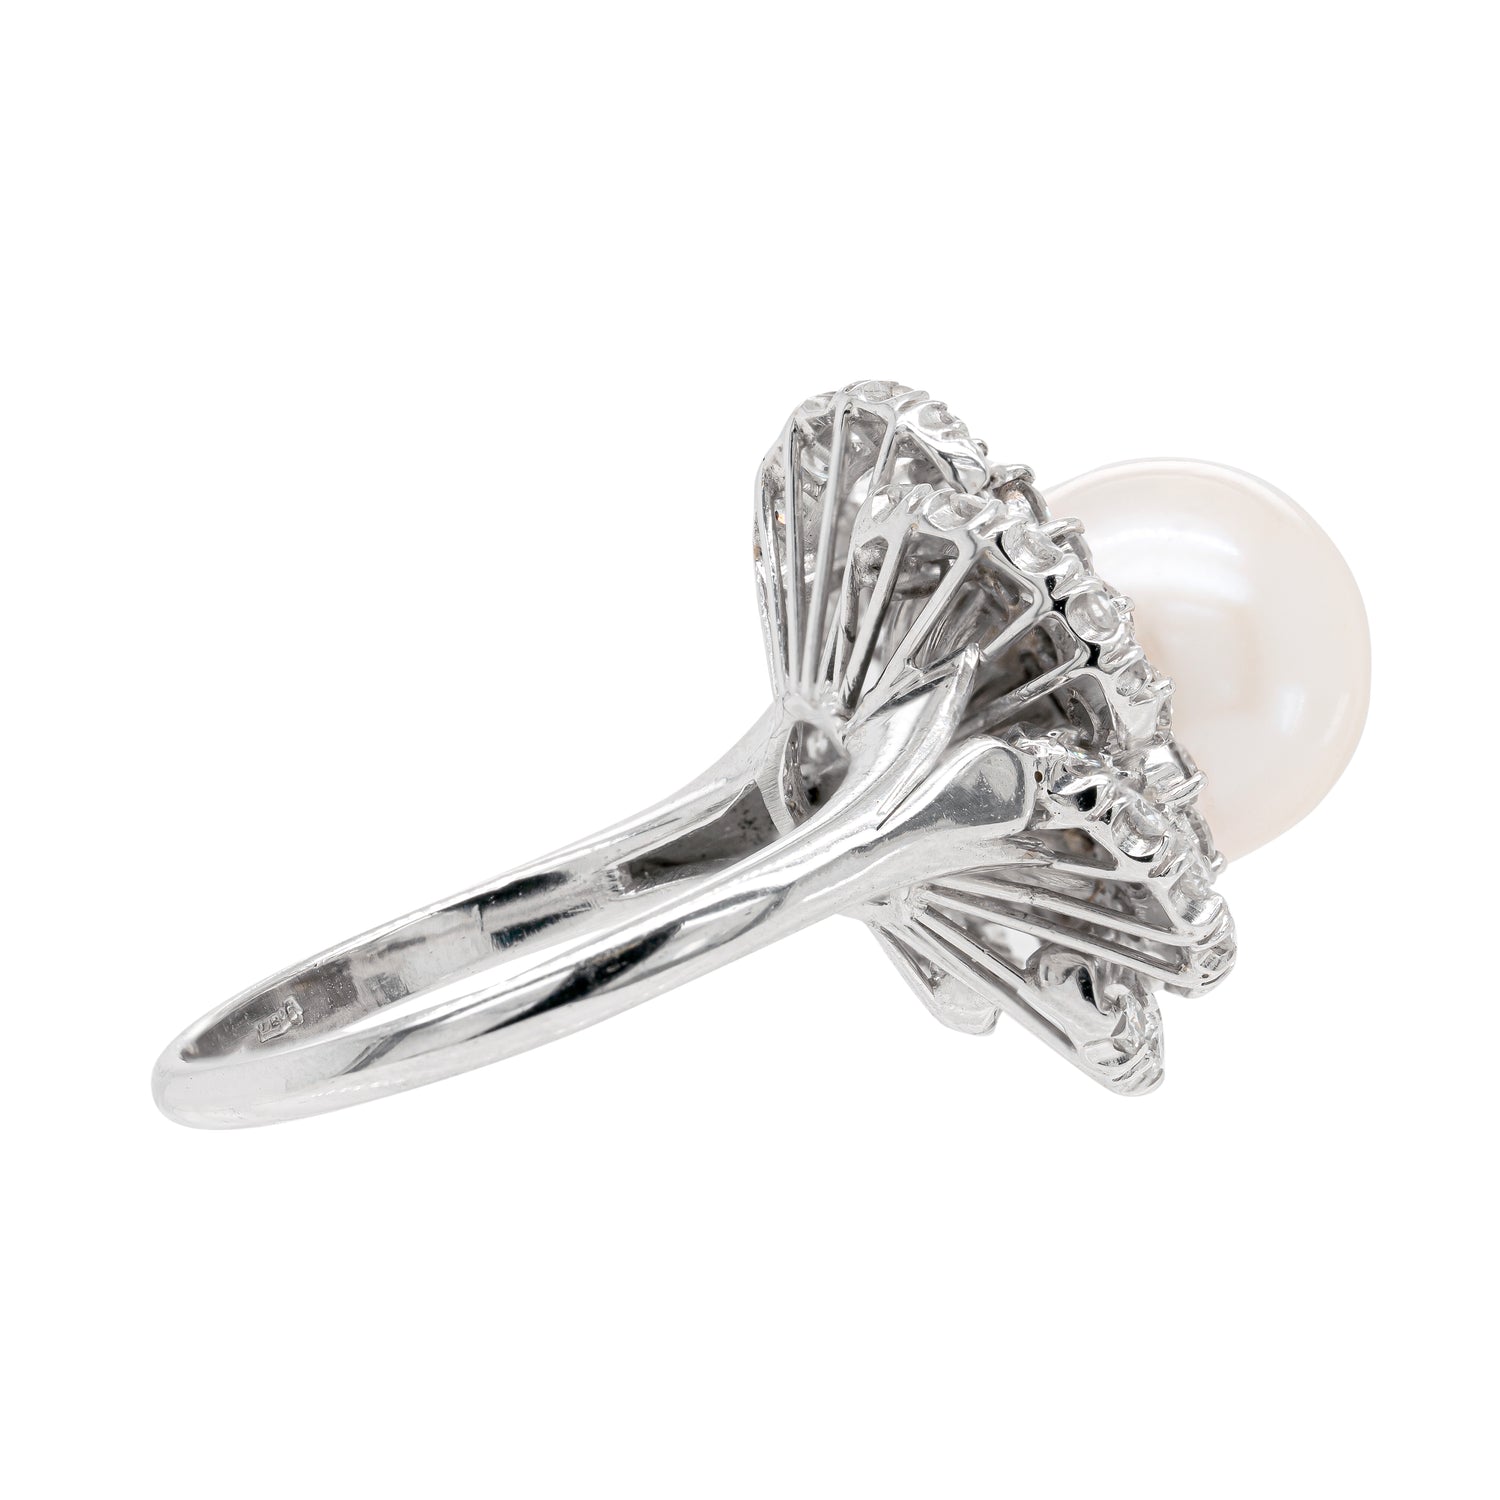 South Sea Pearl and Diamond 18 Carat White Gold Ballerina Cluster Ring